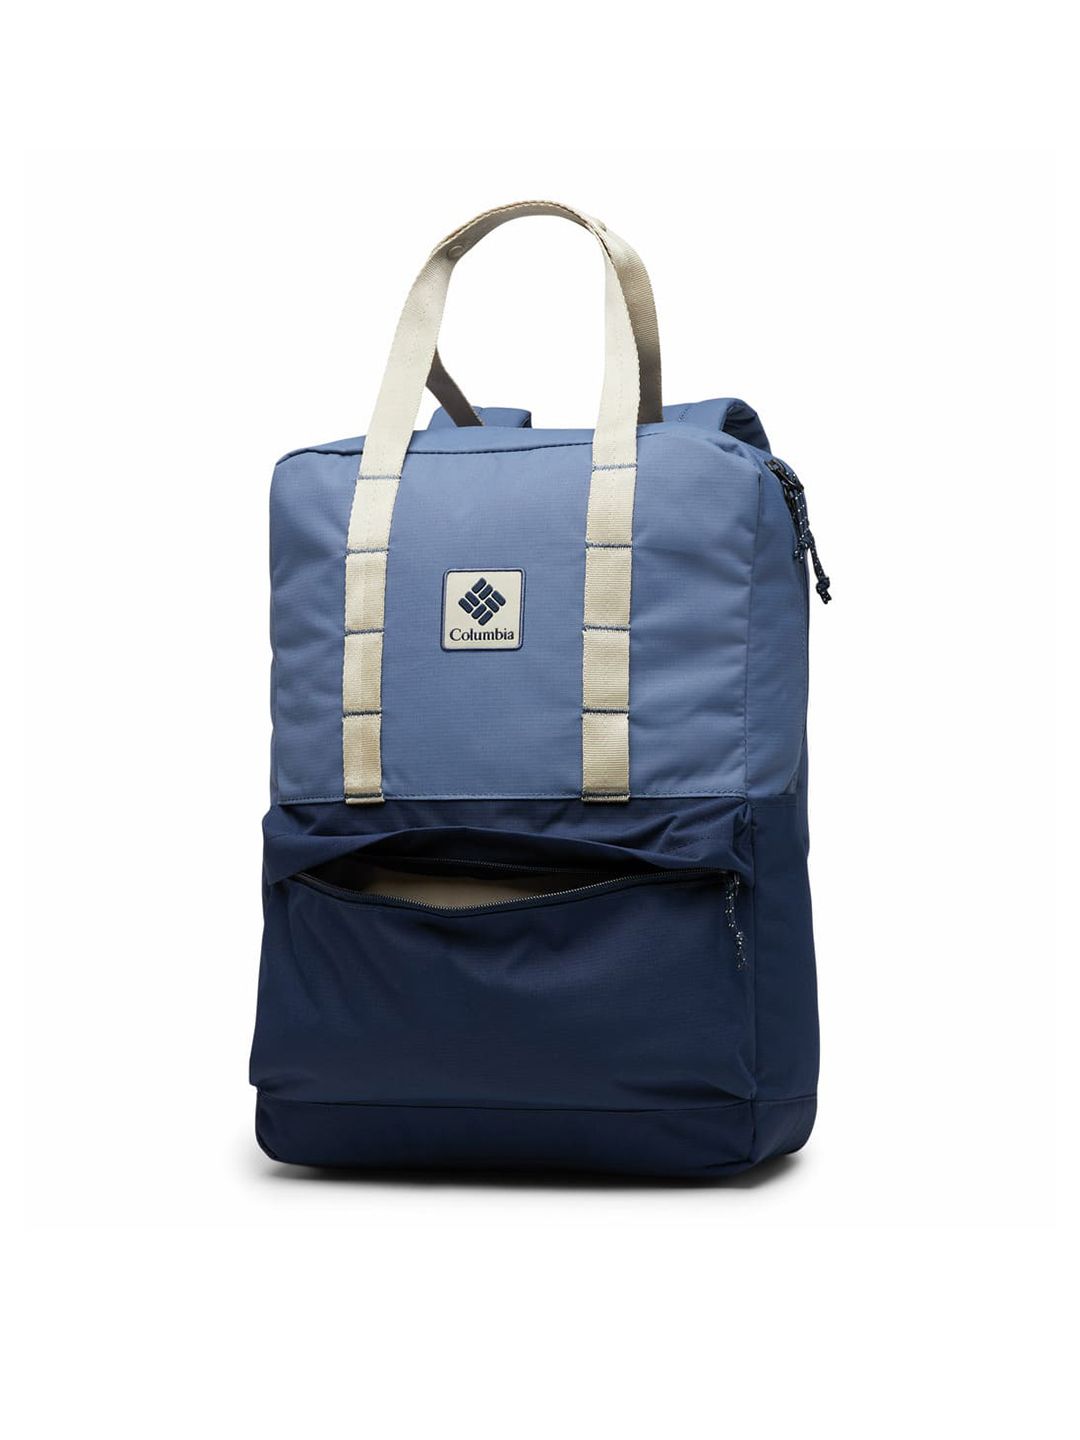 Columbia Unisex Blue & Navy Blue Colourblocked 16 Inch Laptop Backpack Price in India